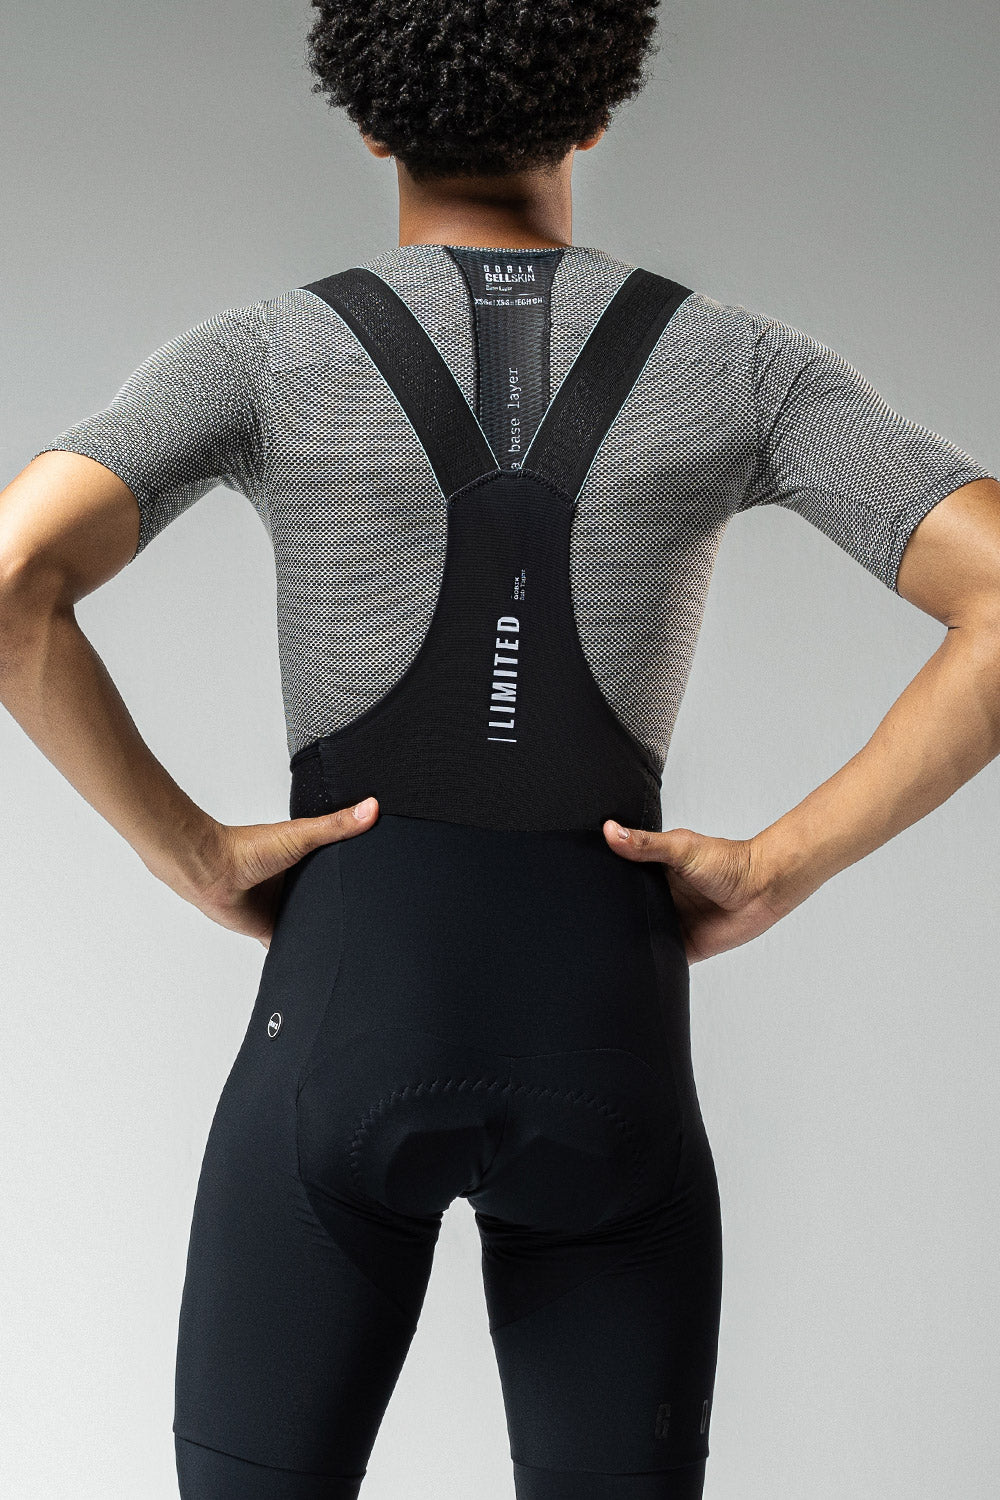 SOUS MAILLOT MANCHES COURTES CELL SKIN HOMME GREYBLACK